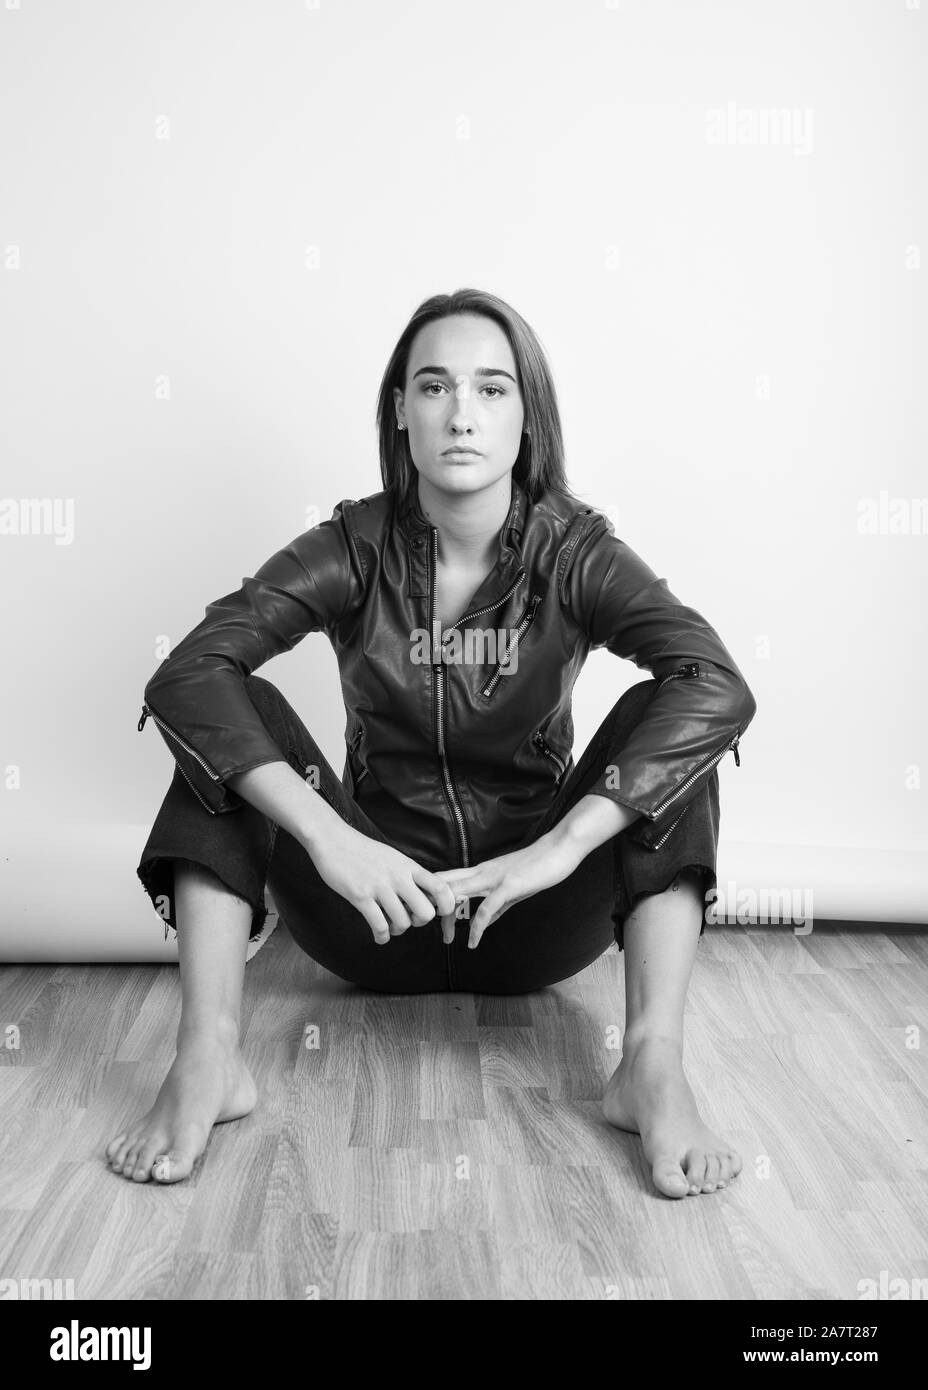 Black and white portrait of a barefoot young woman wearing a leather jacket and sitting on floor Stock Photo